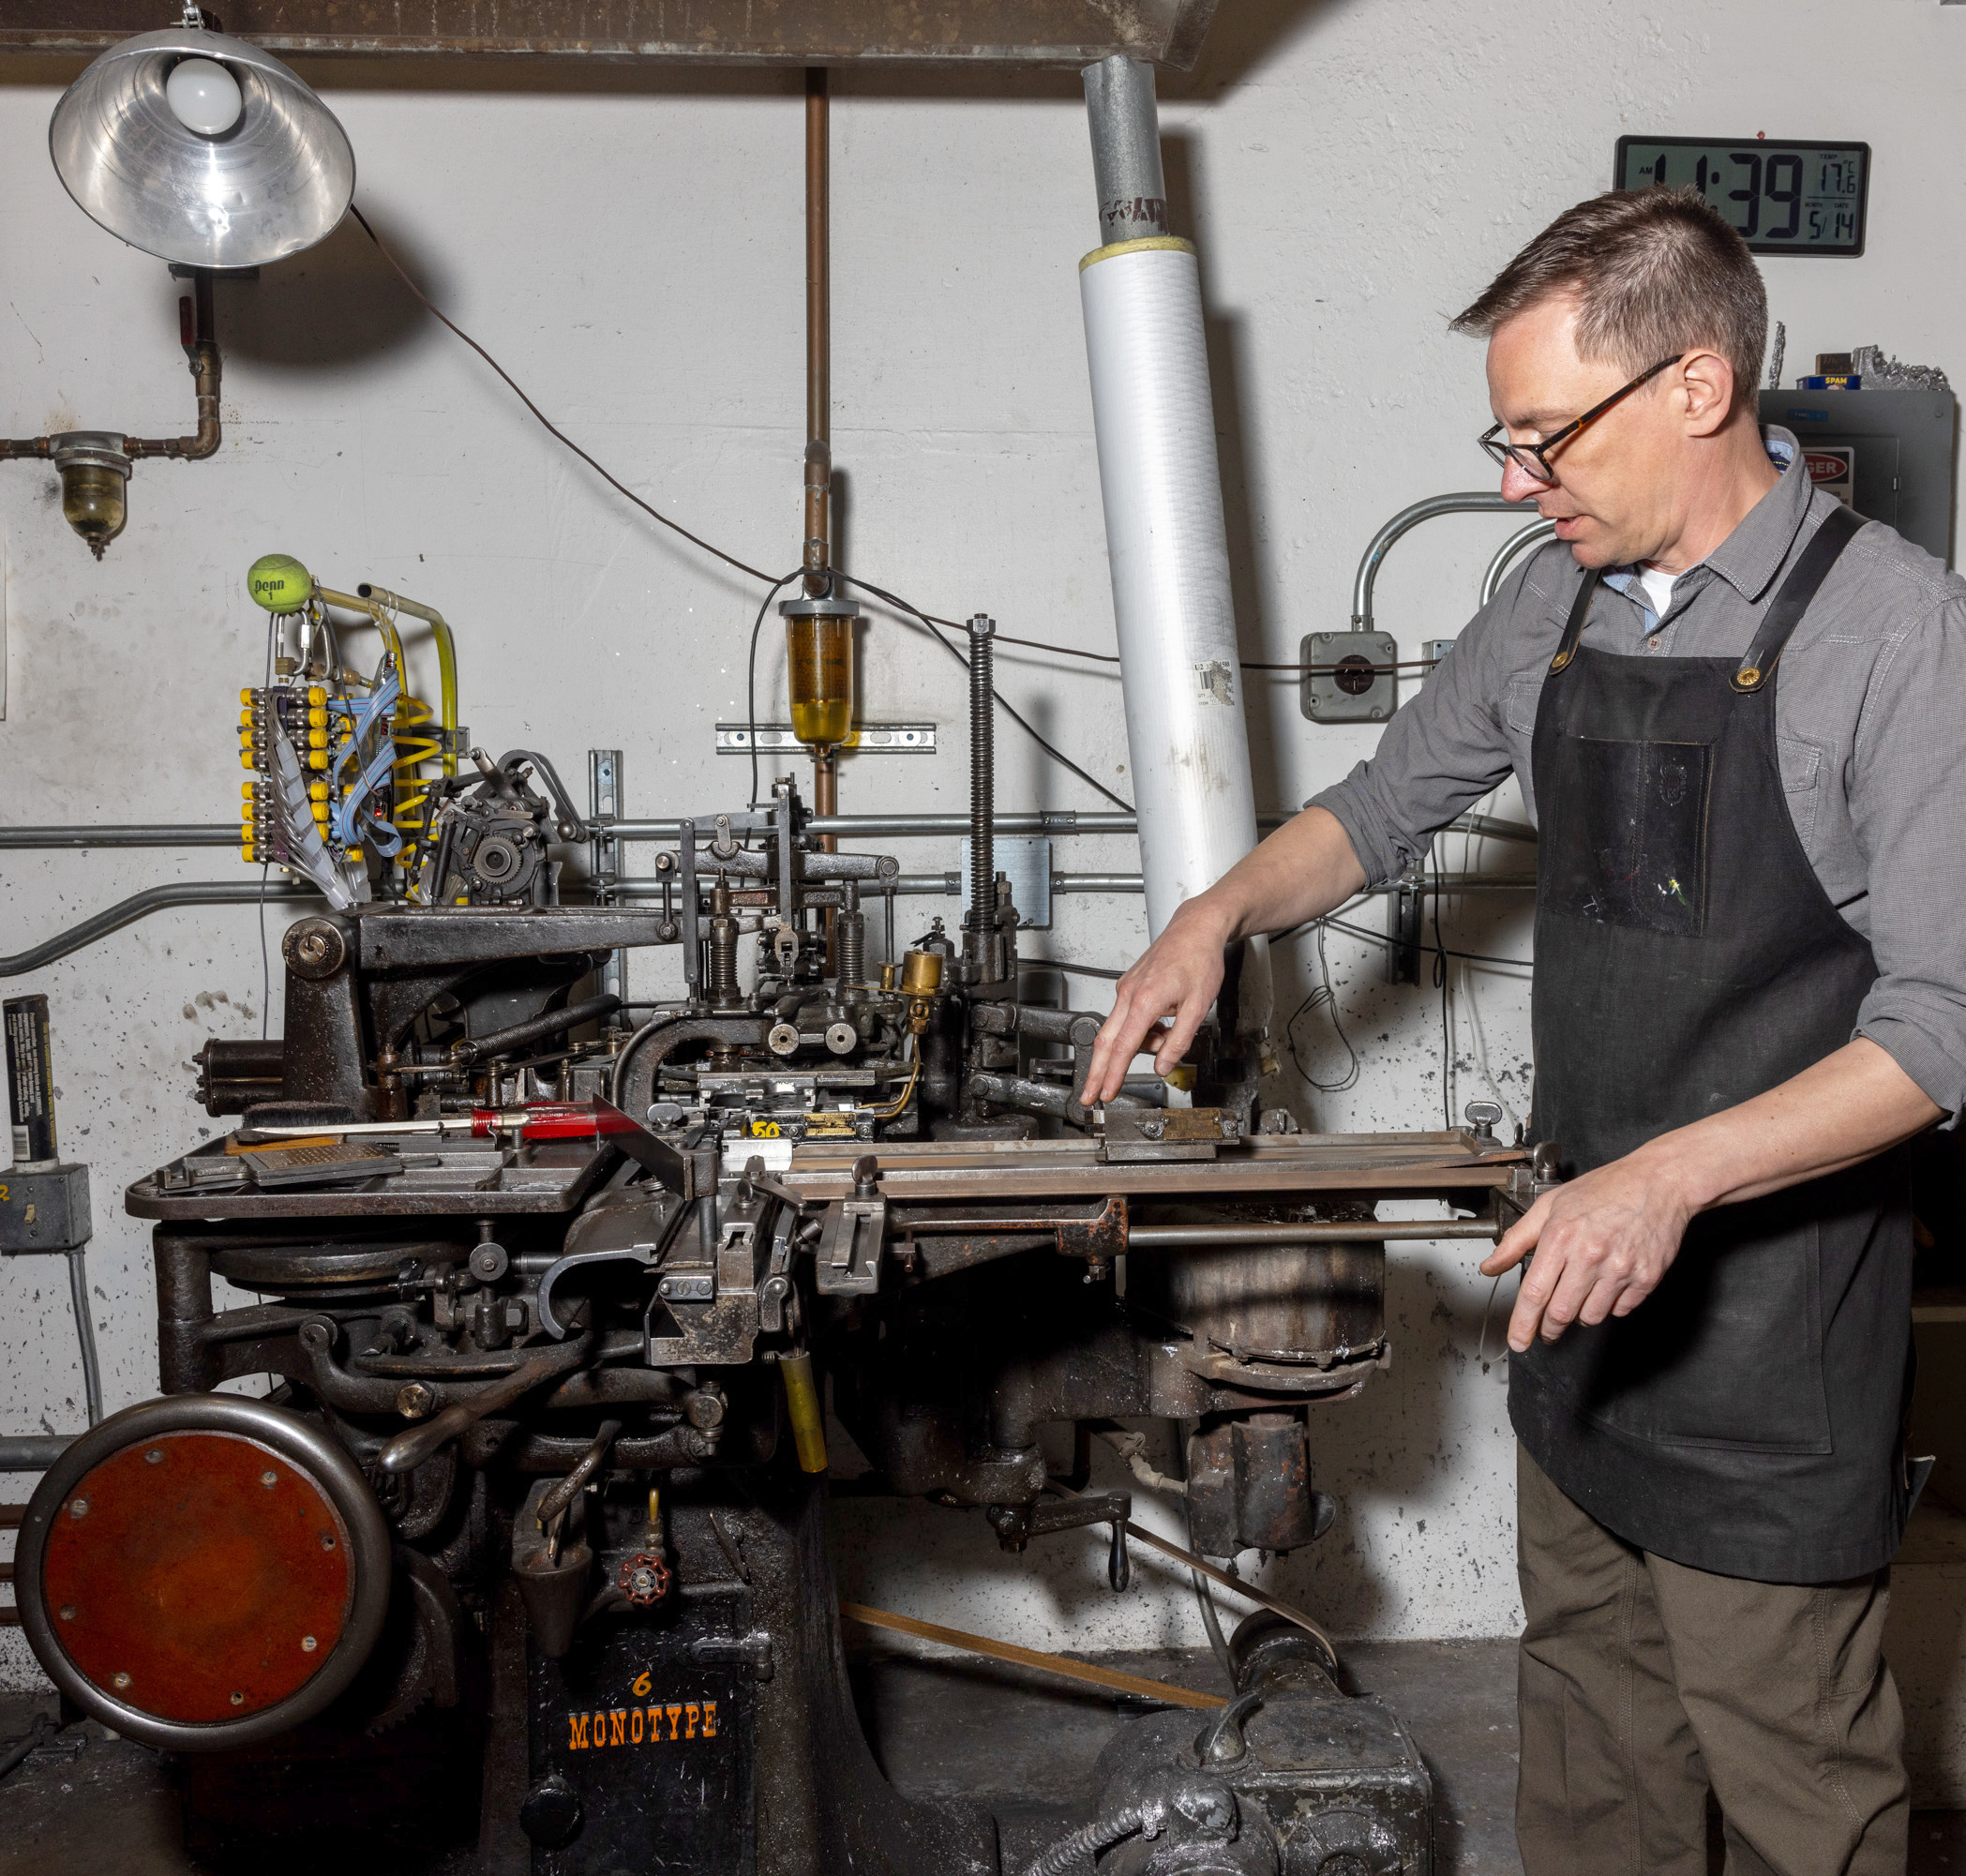 A man in glasses and an apron operates a complex, vintage printing machine in a workshop with tools and pipes around.